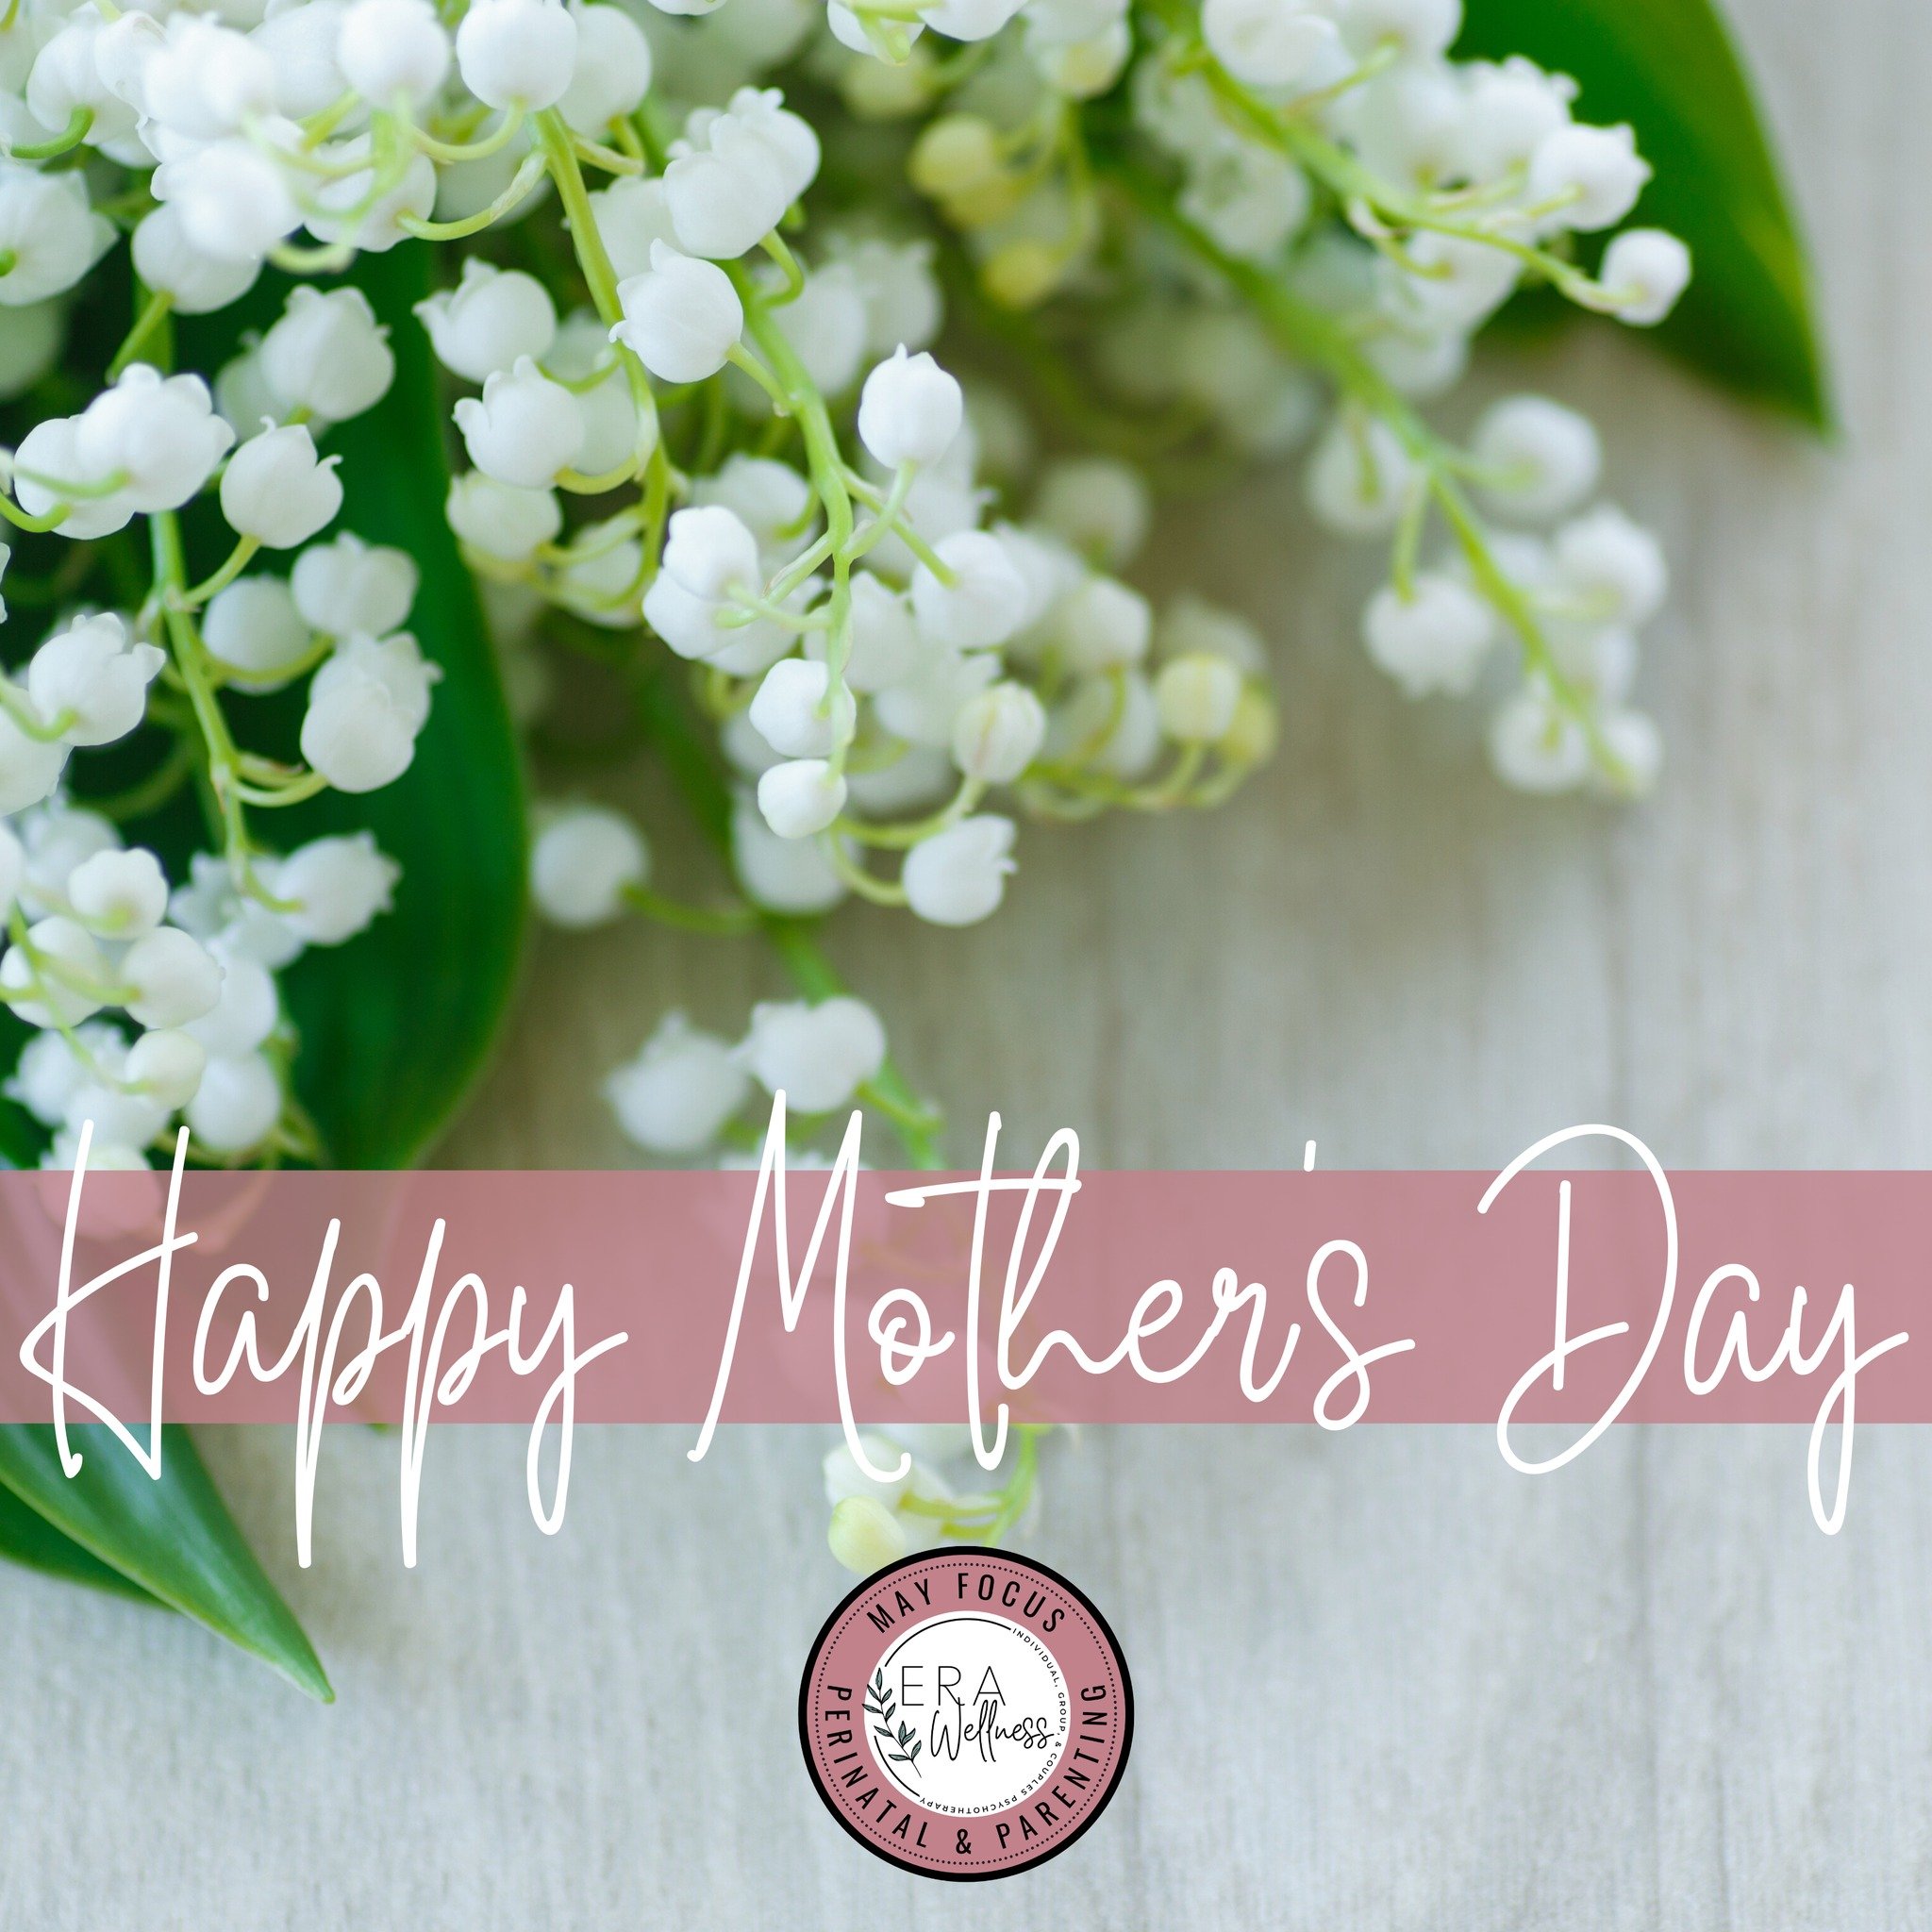 Mother's Day can be so many things - wonderful, stressful, overwhelming, underwhelming, conflicted, devastating. 

But no matter how this day actually goes or where you are in your journey as a mother - we hope that today you are respected and apprec